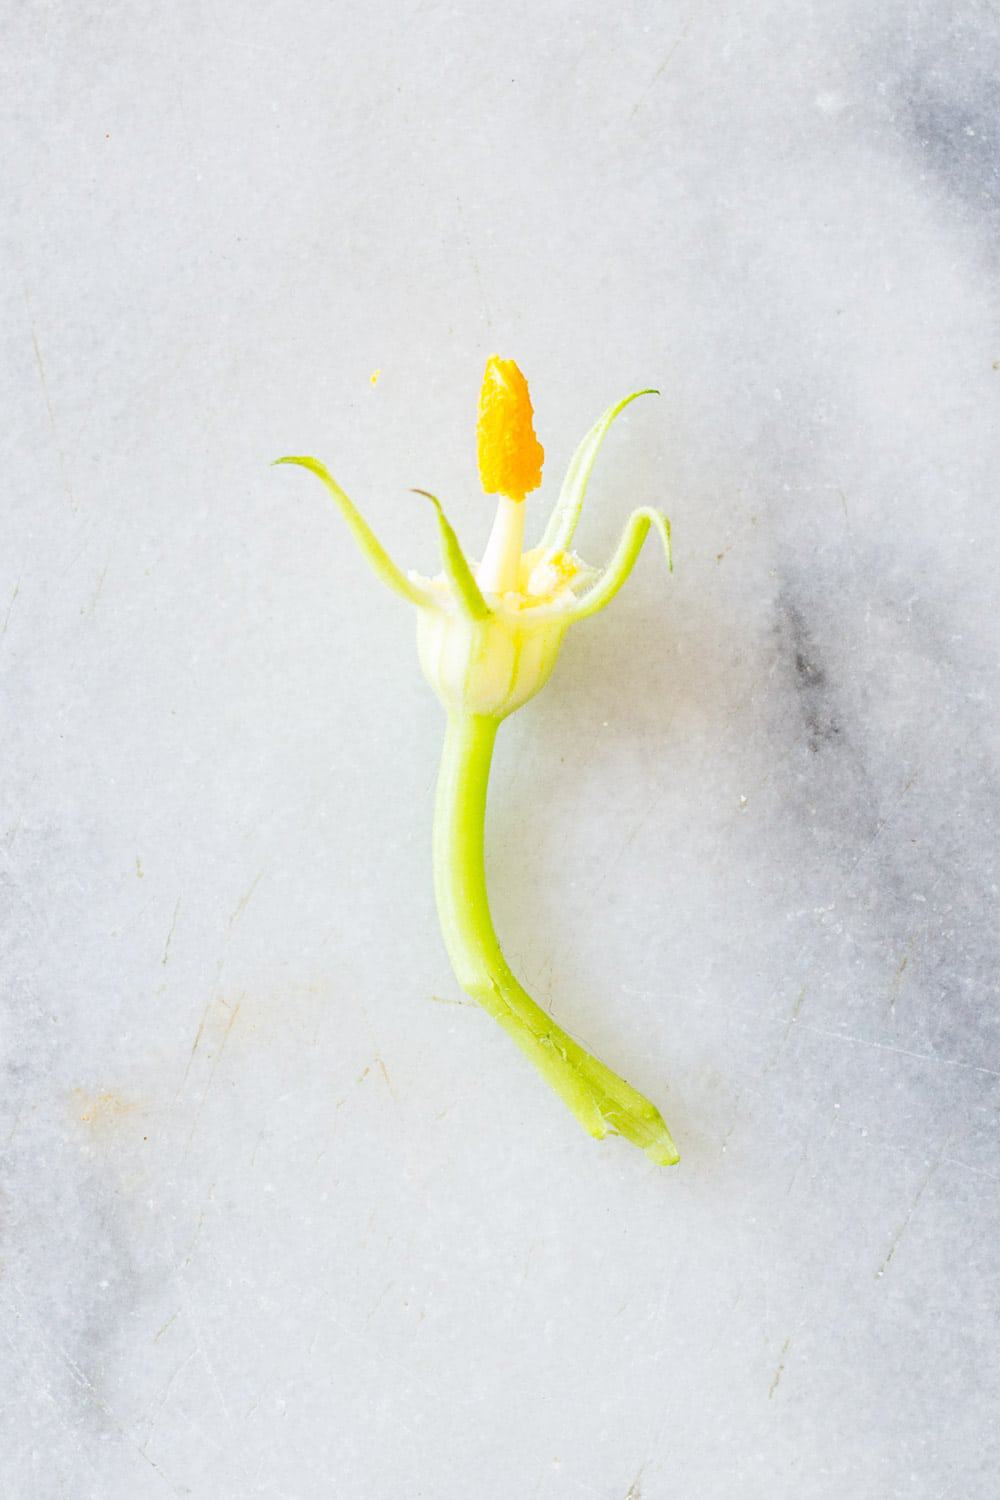 A single open Squash Blossom on a marble surface.